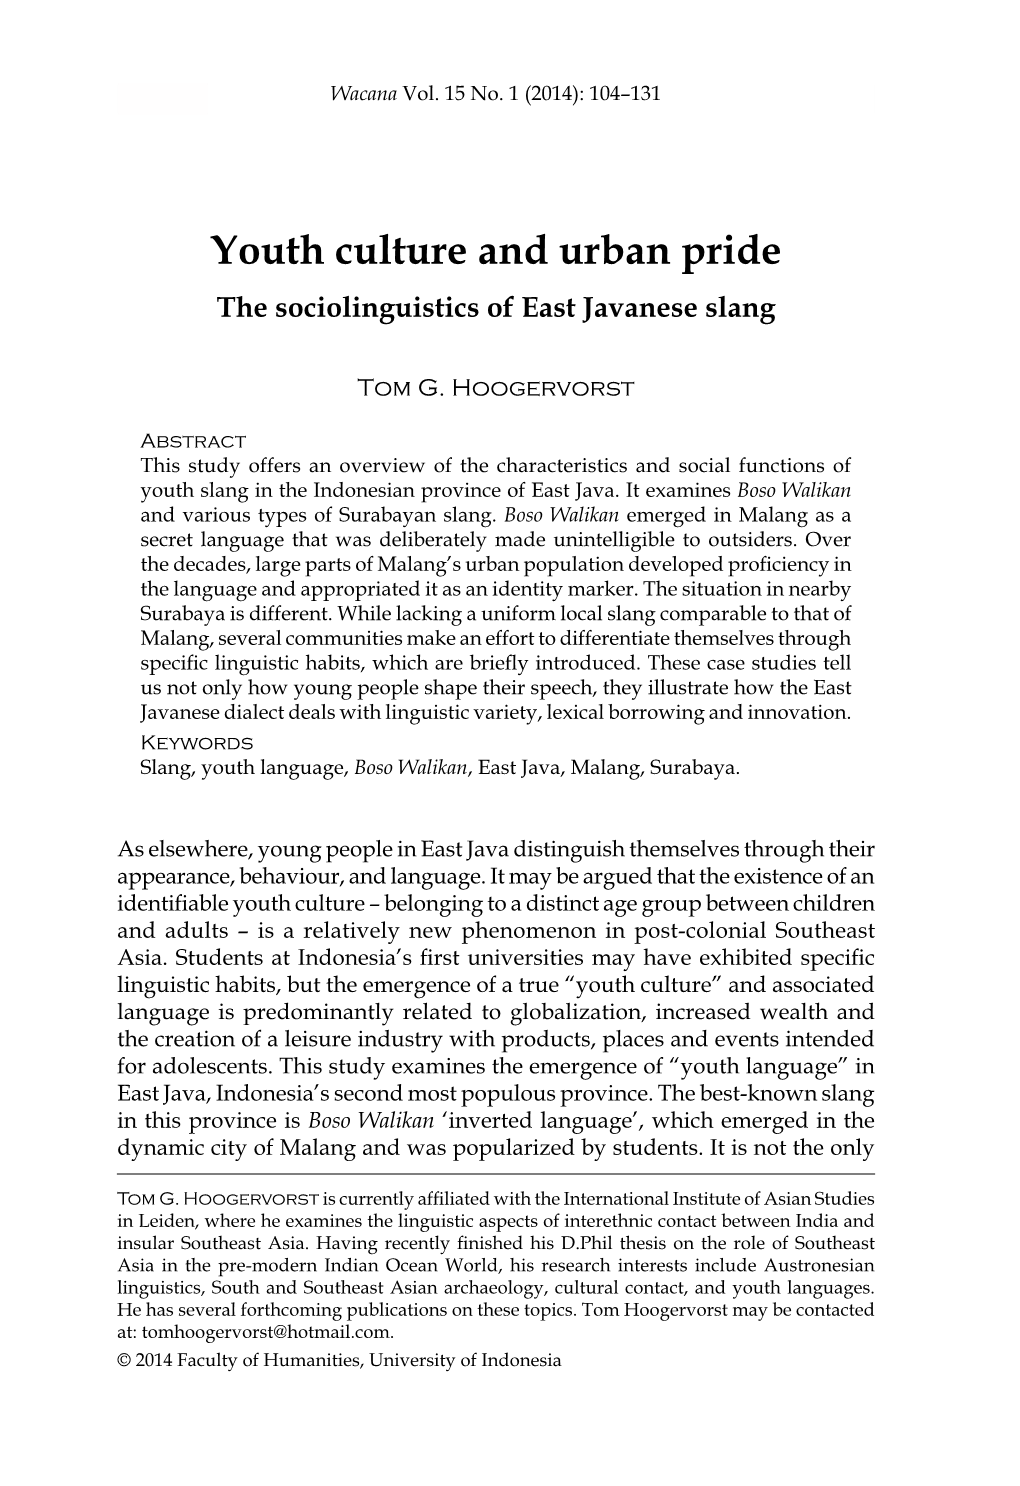 Youth Culture and Urban Pride 105